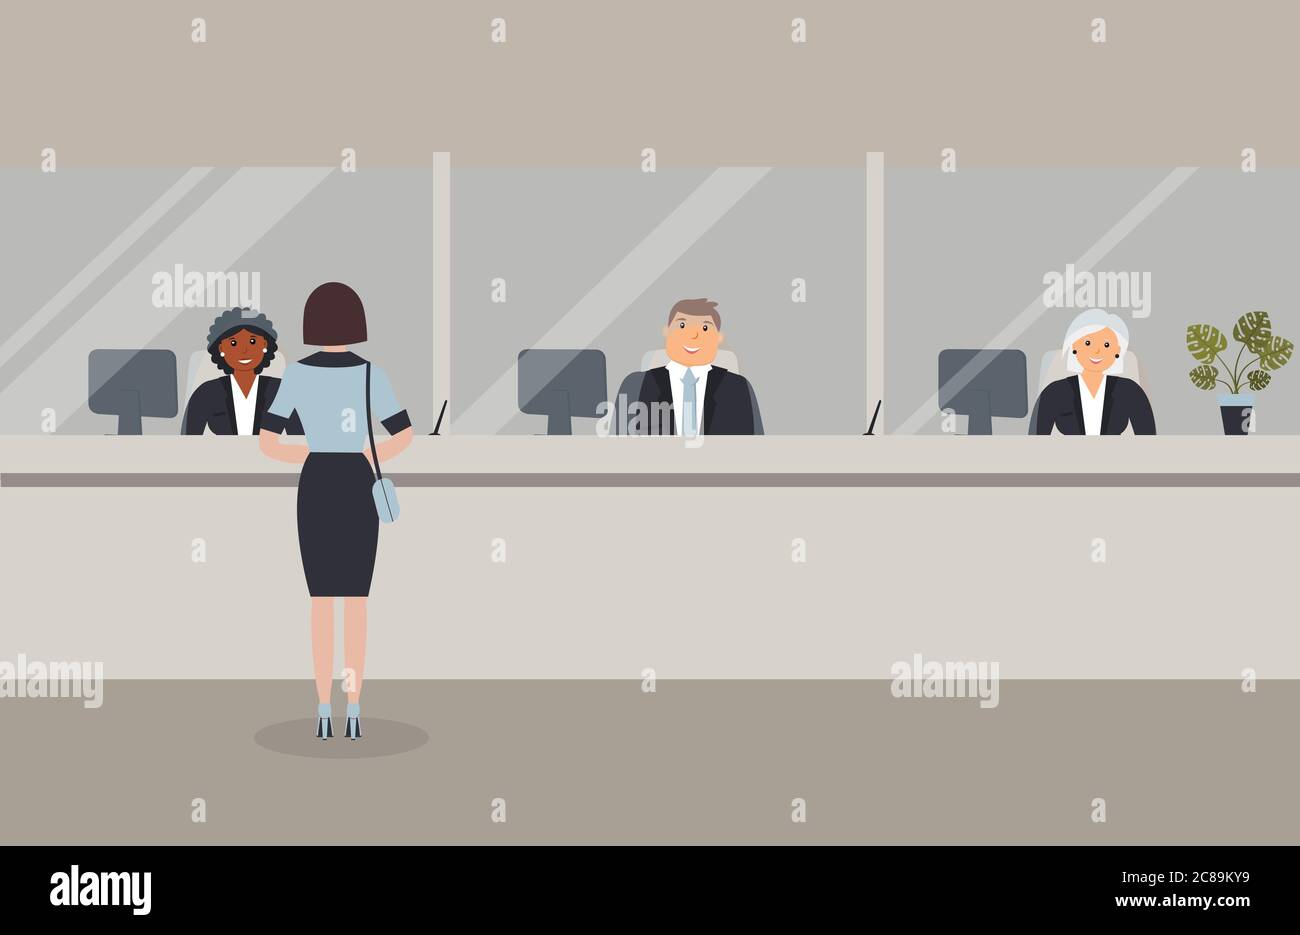 Bank office interior:Bank employees sit behind a barrier with glass and serve the Bank customers.Elegant interior financial institution.Female client Stock Vector